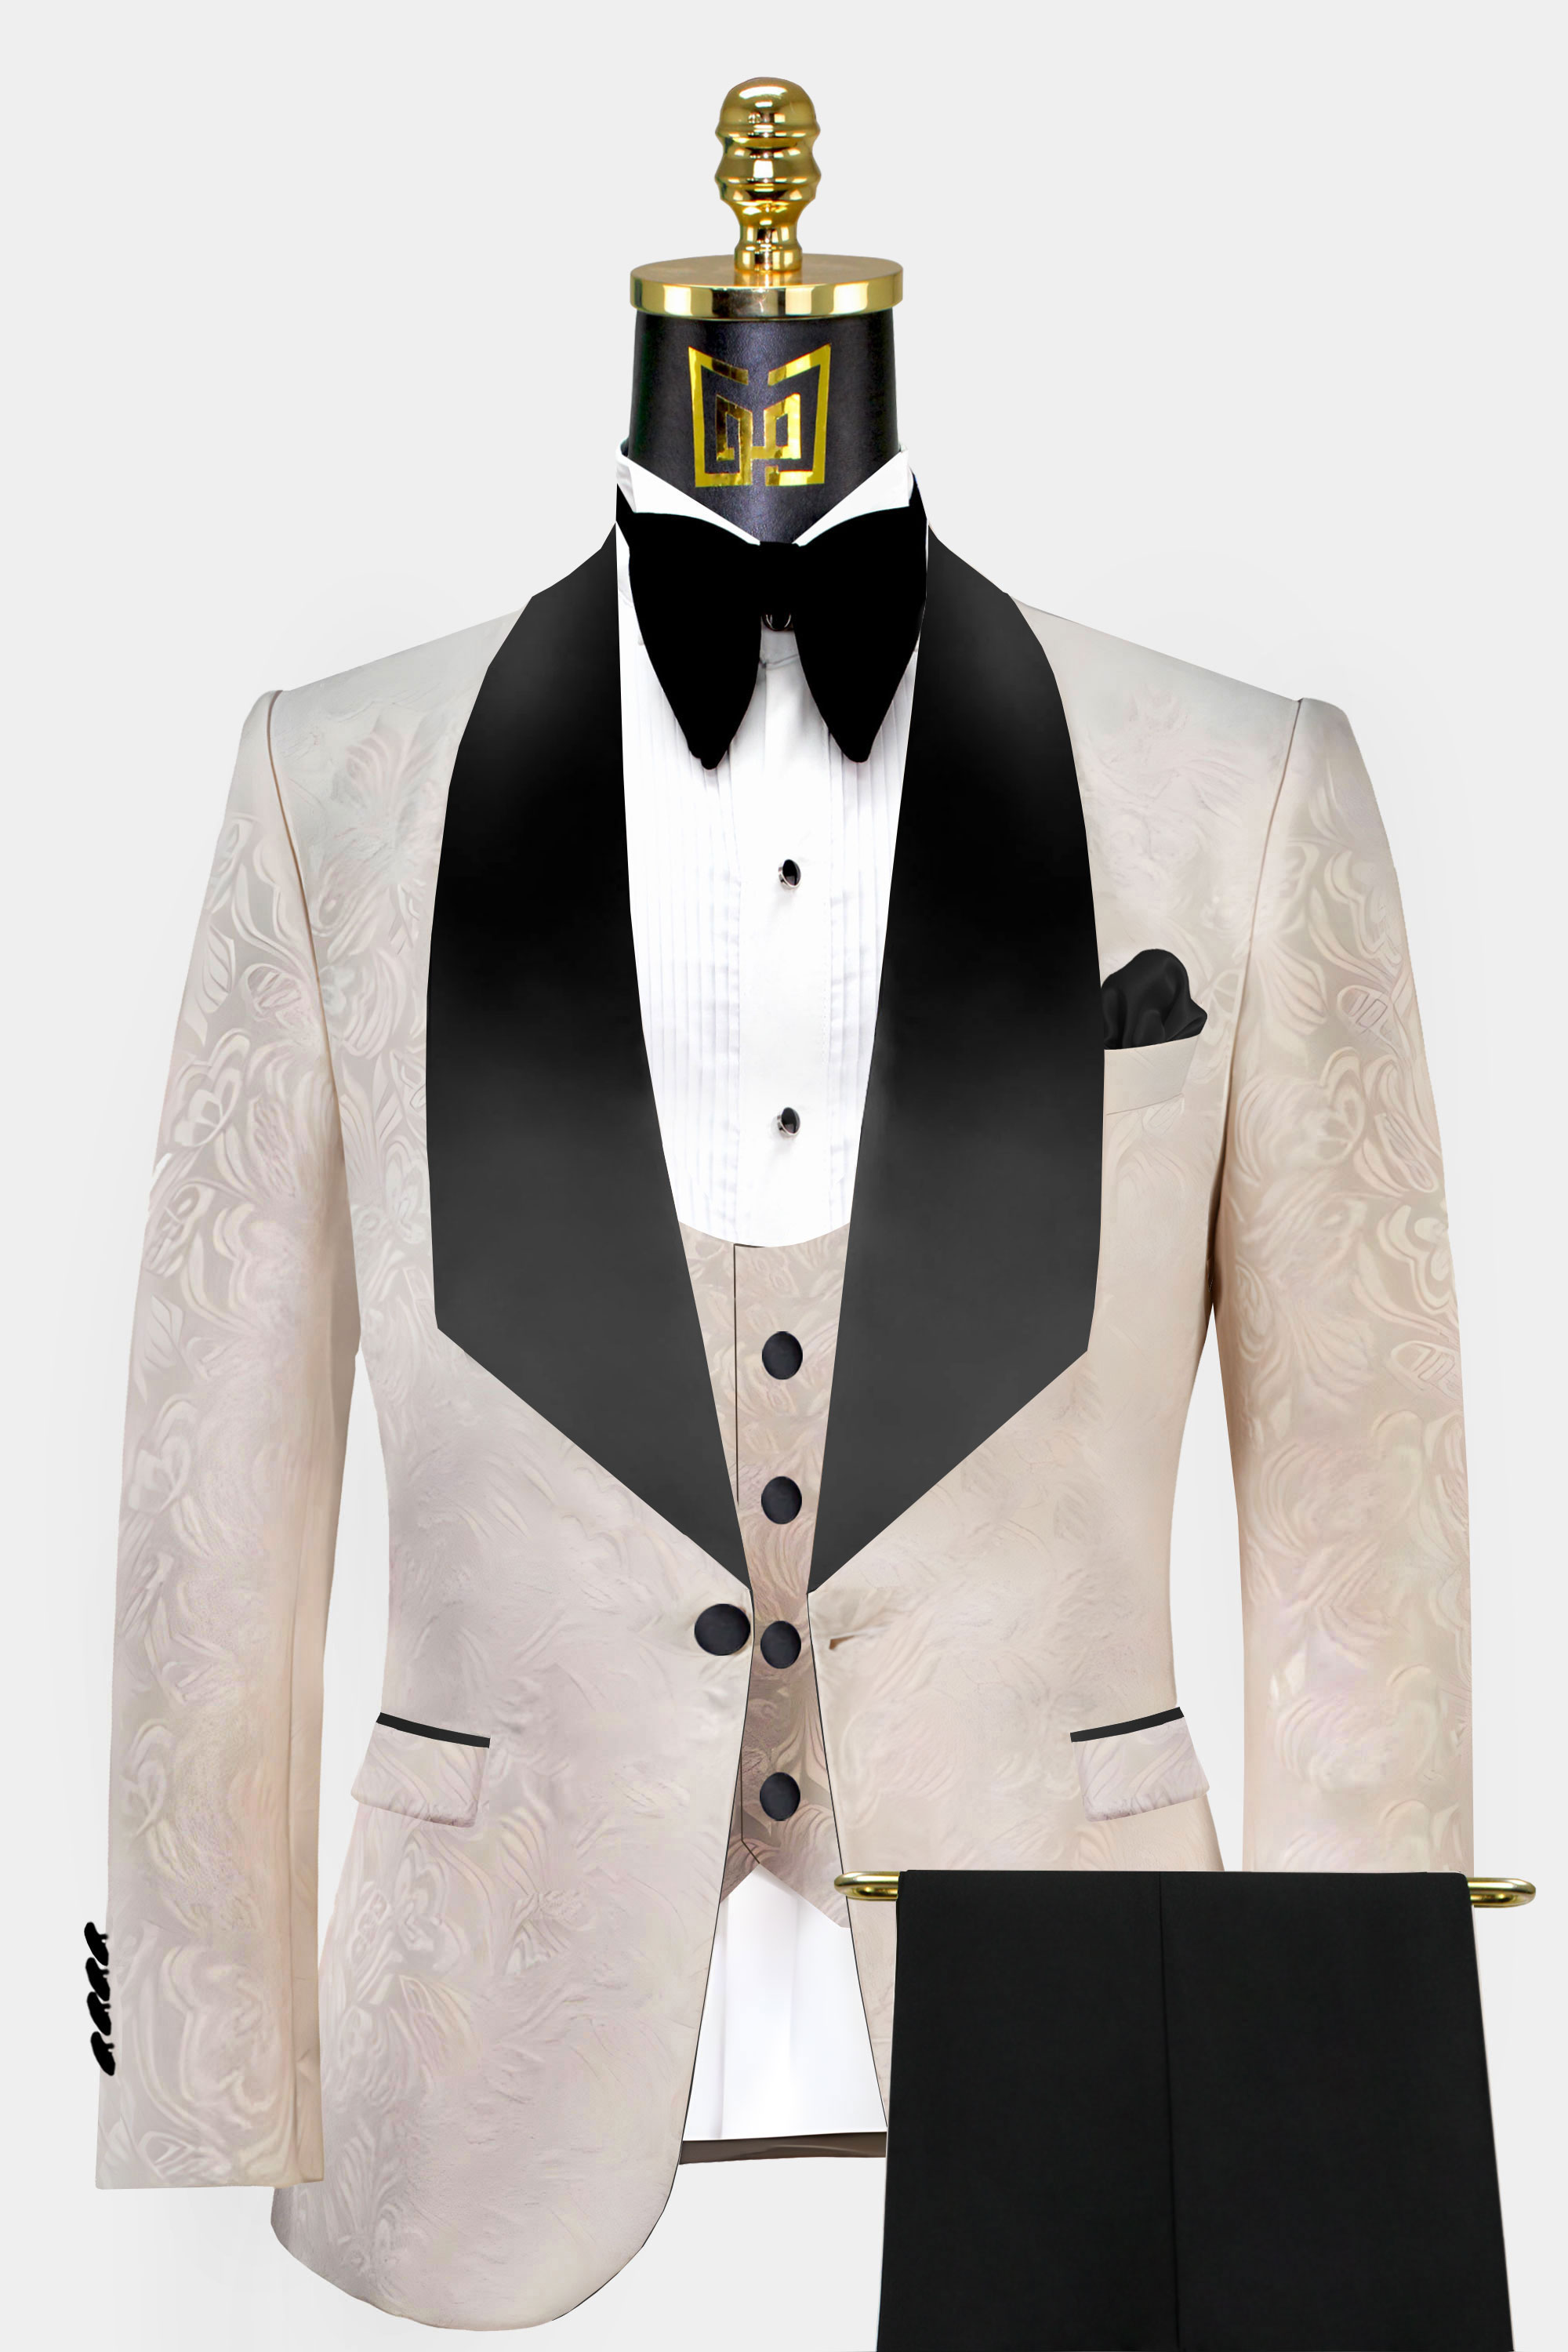 Mens-Black-and-Champagne-Tuxedo-Groom-Wedding-Prom-Suit-Outfit-from-Gentlemansguru.com